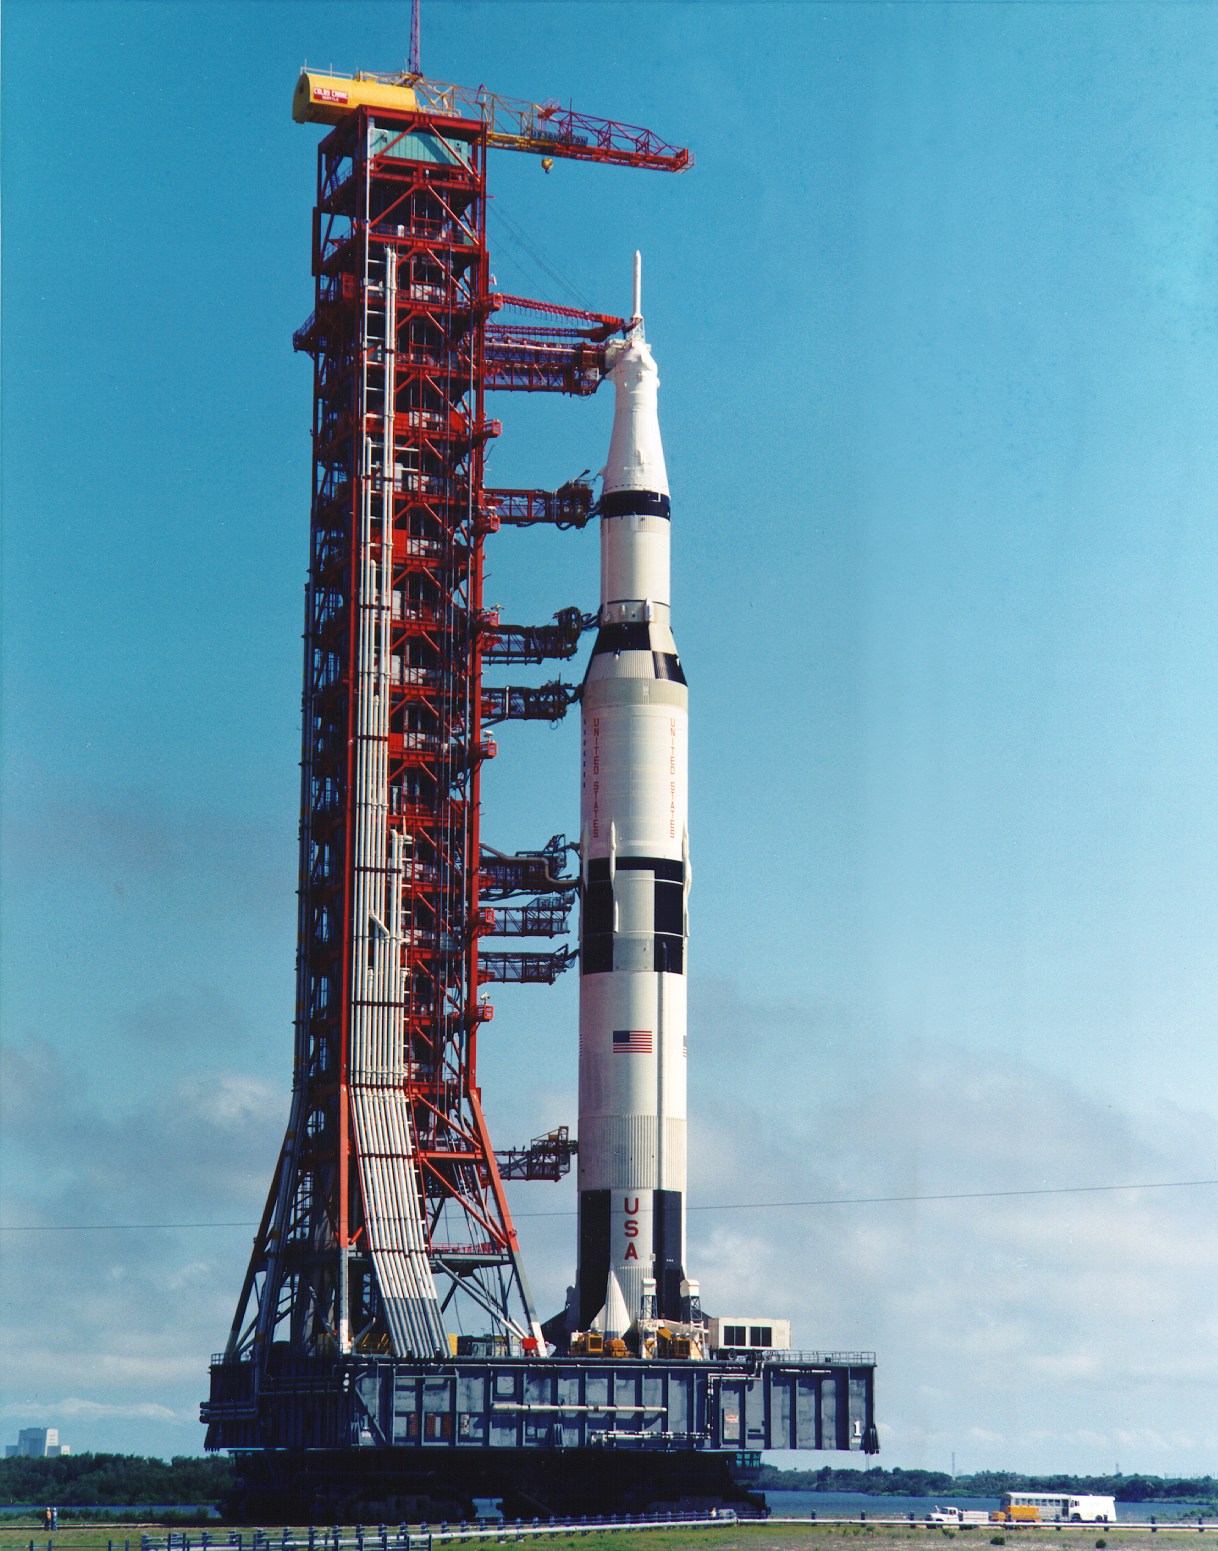 Apollo 11/Saturn V (AS-506) on the crawler transporter at Kennedy Space center, Cape Canaveral Florida, 20 May 1969. (NASA)